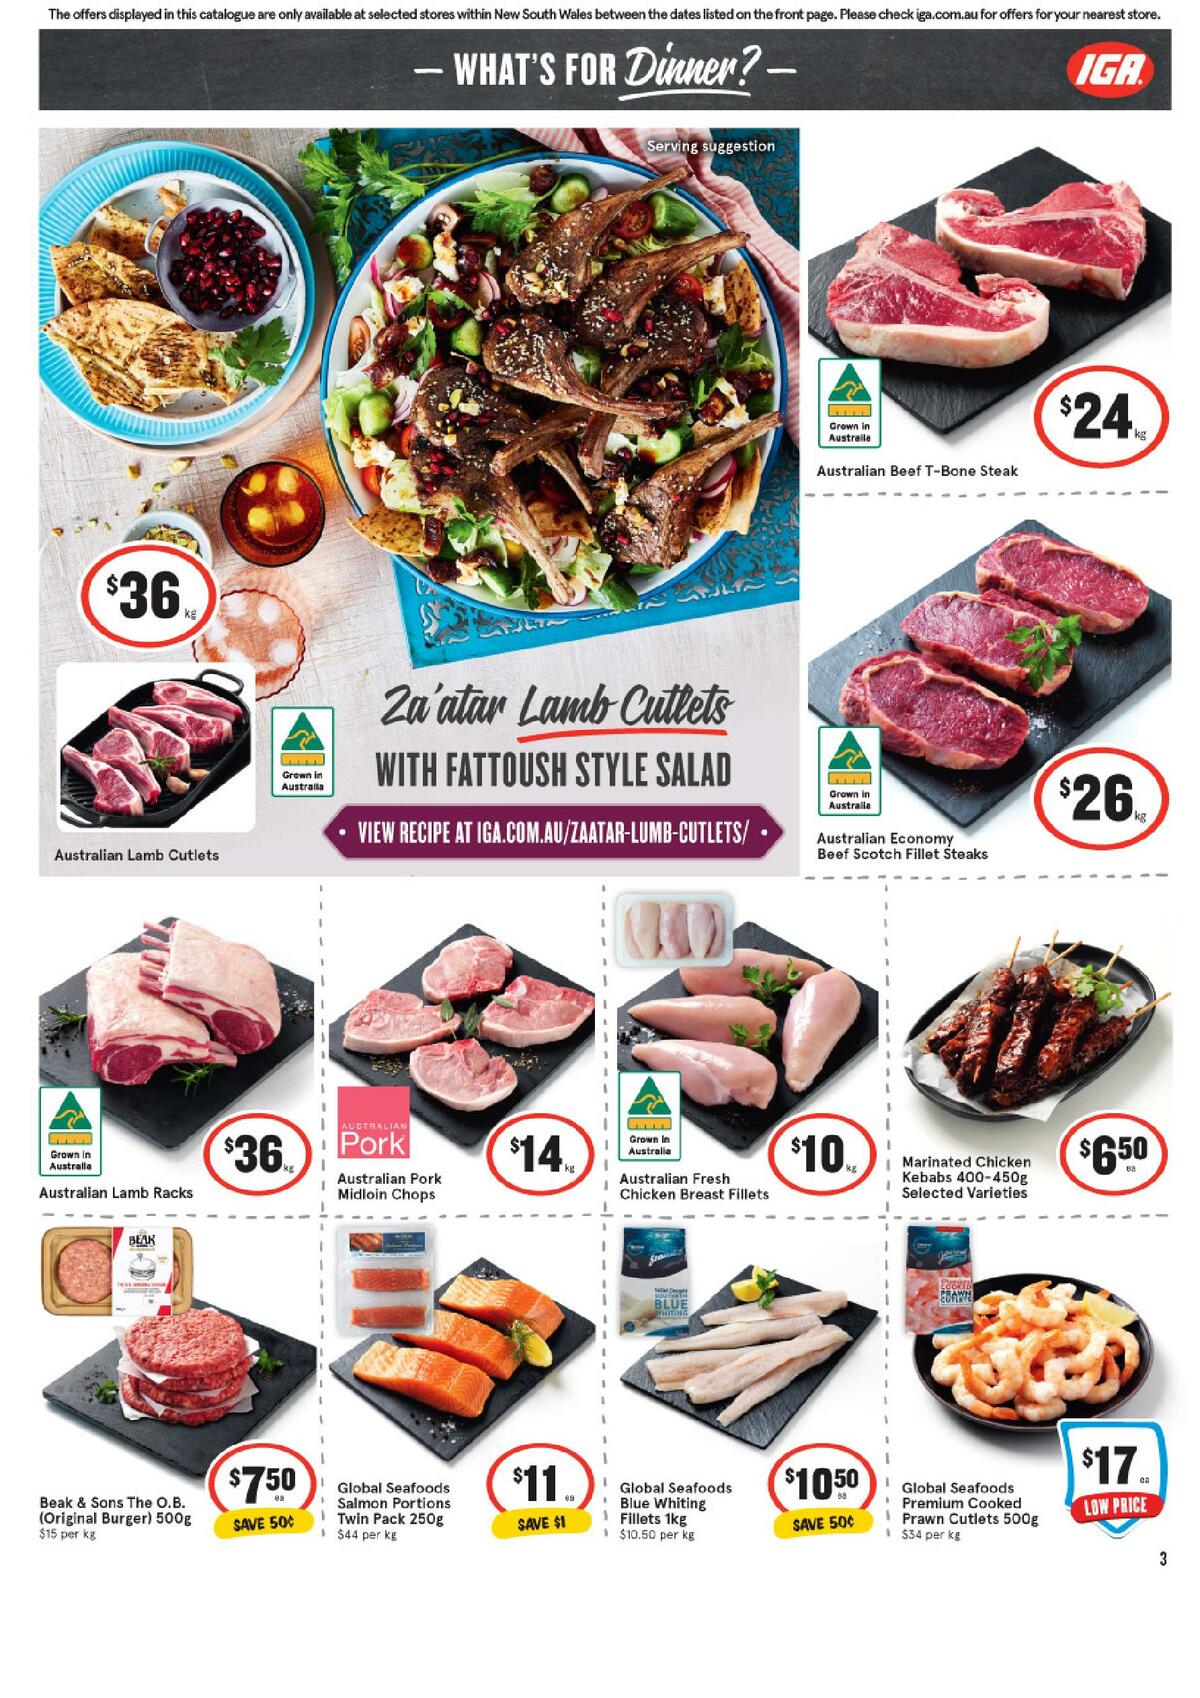 IGA Catalogues from 1 September